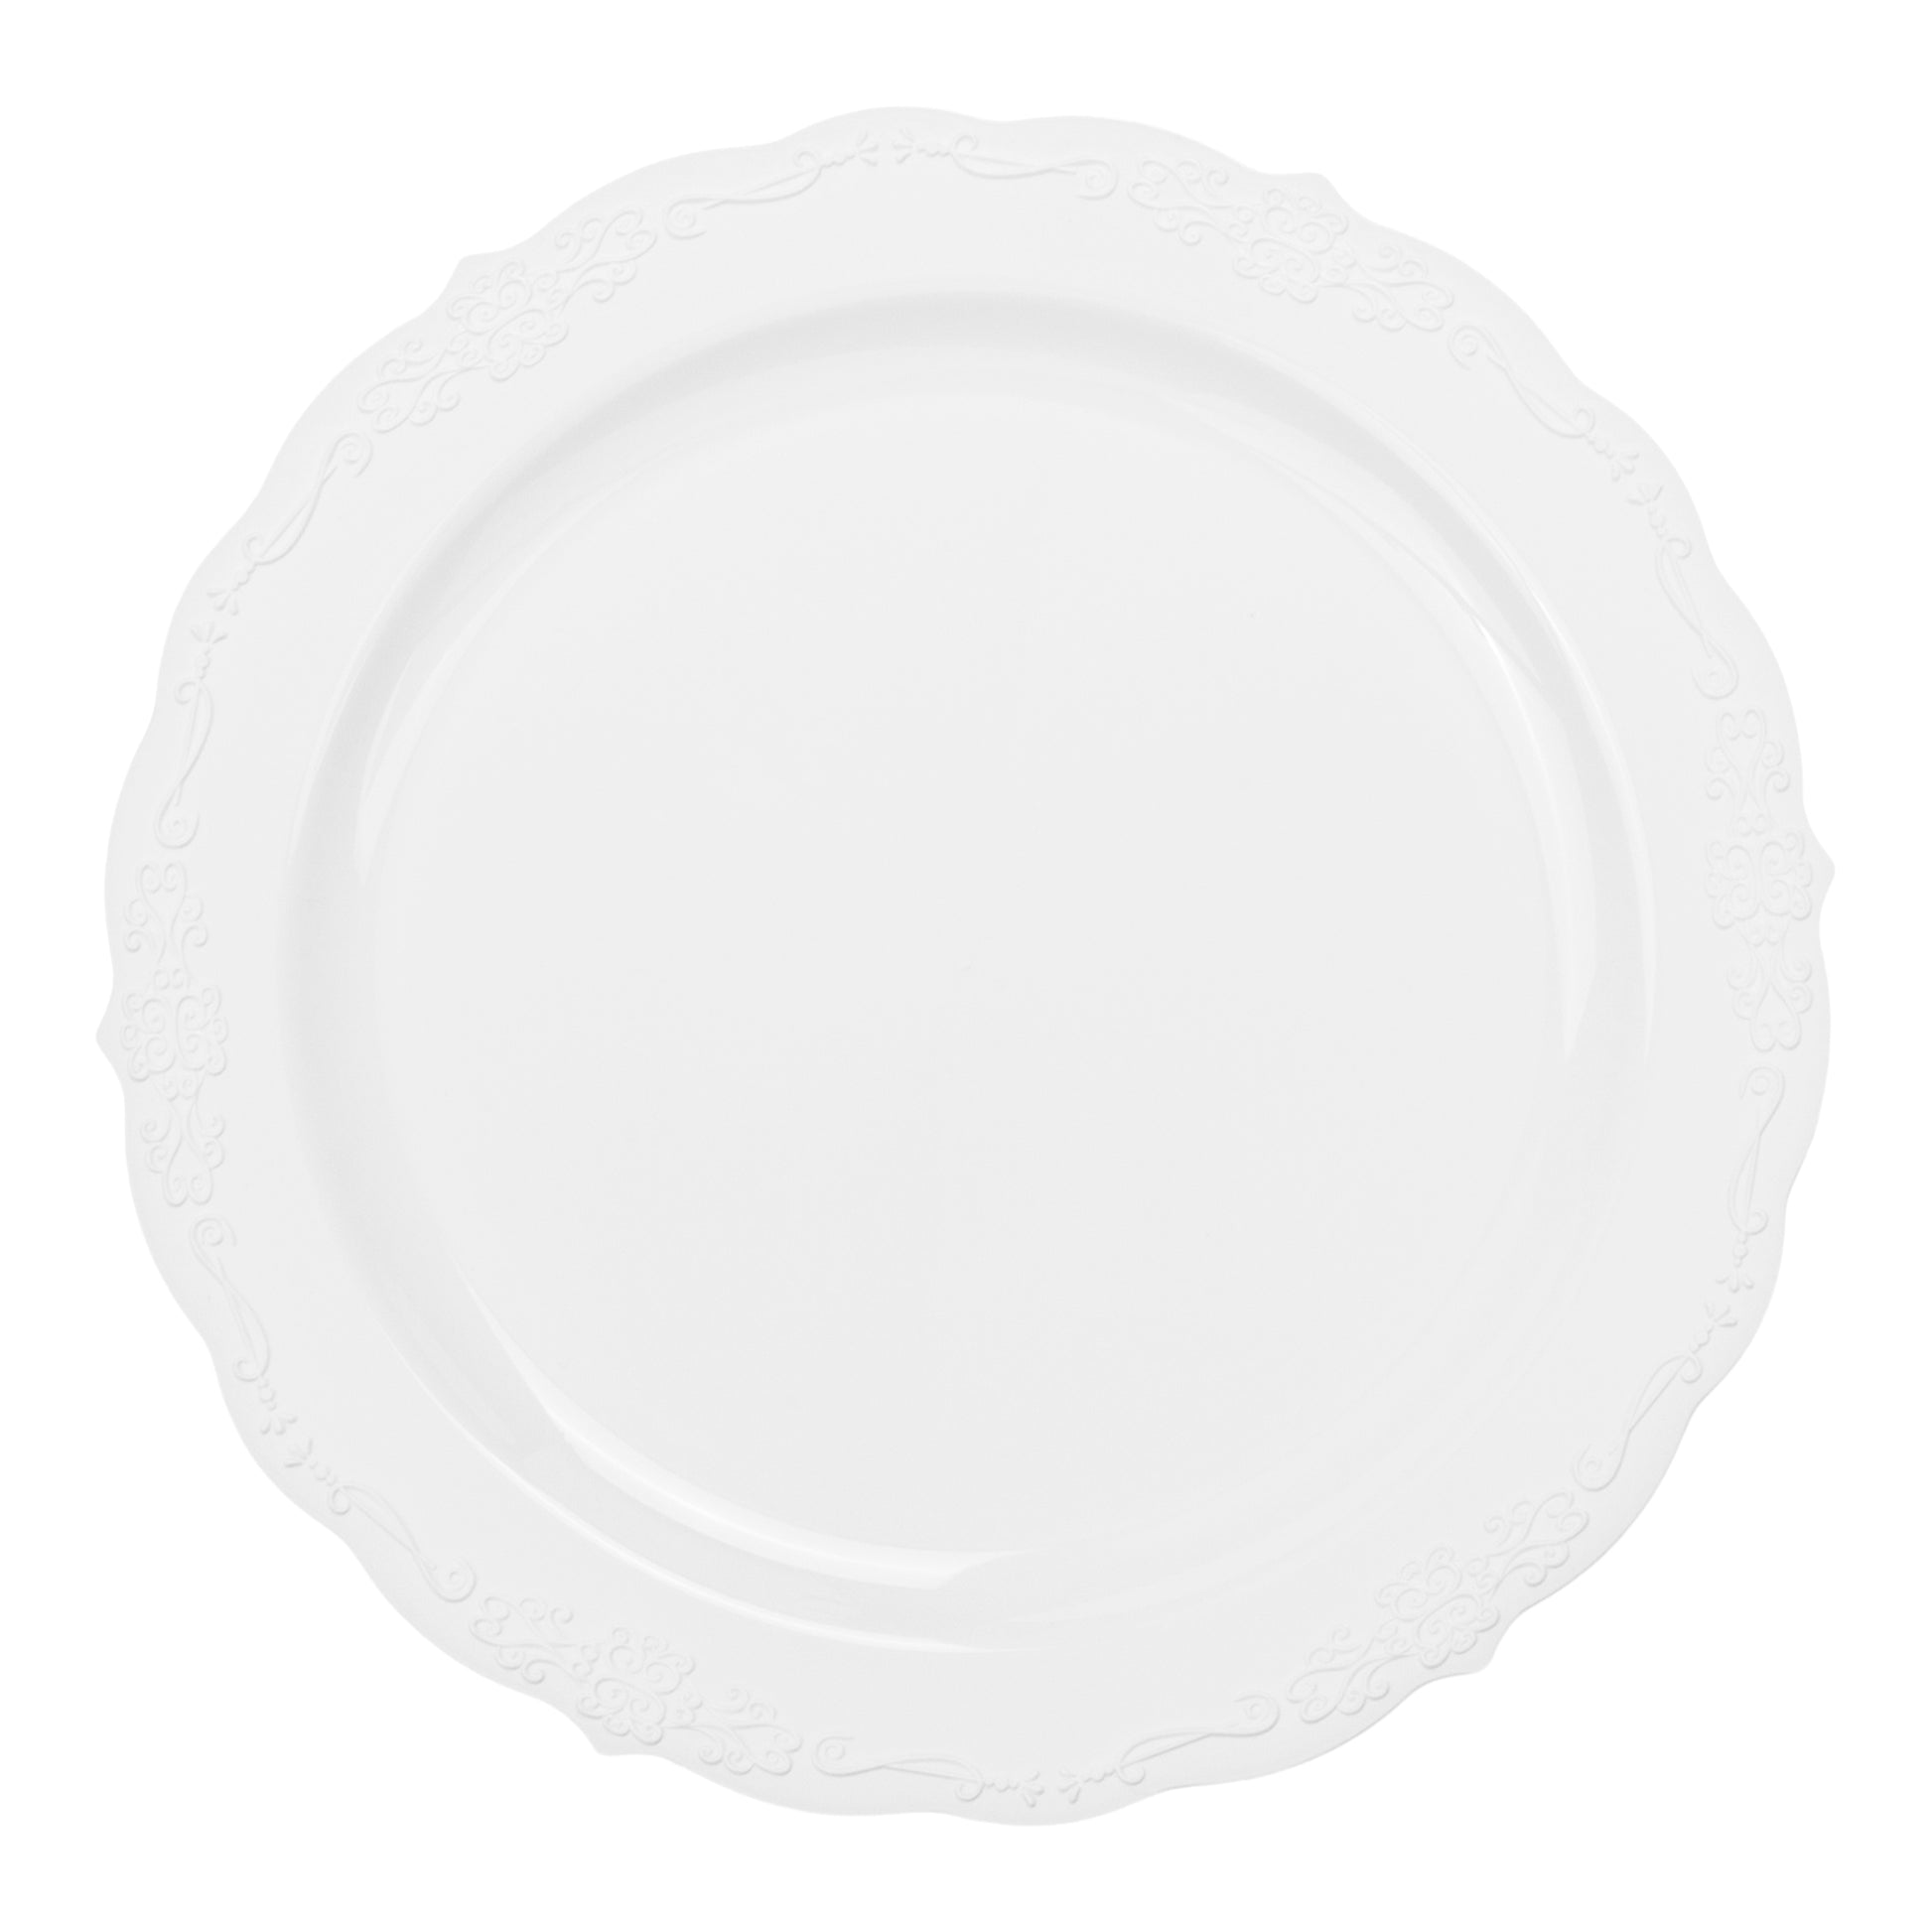 Embossed Disposable Plastic Plates 40 pcs Combo Pack - White